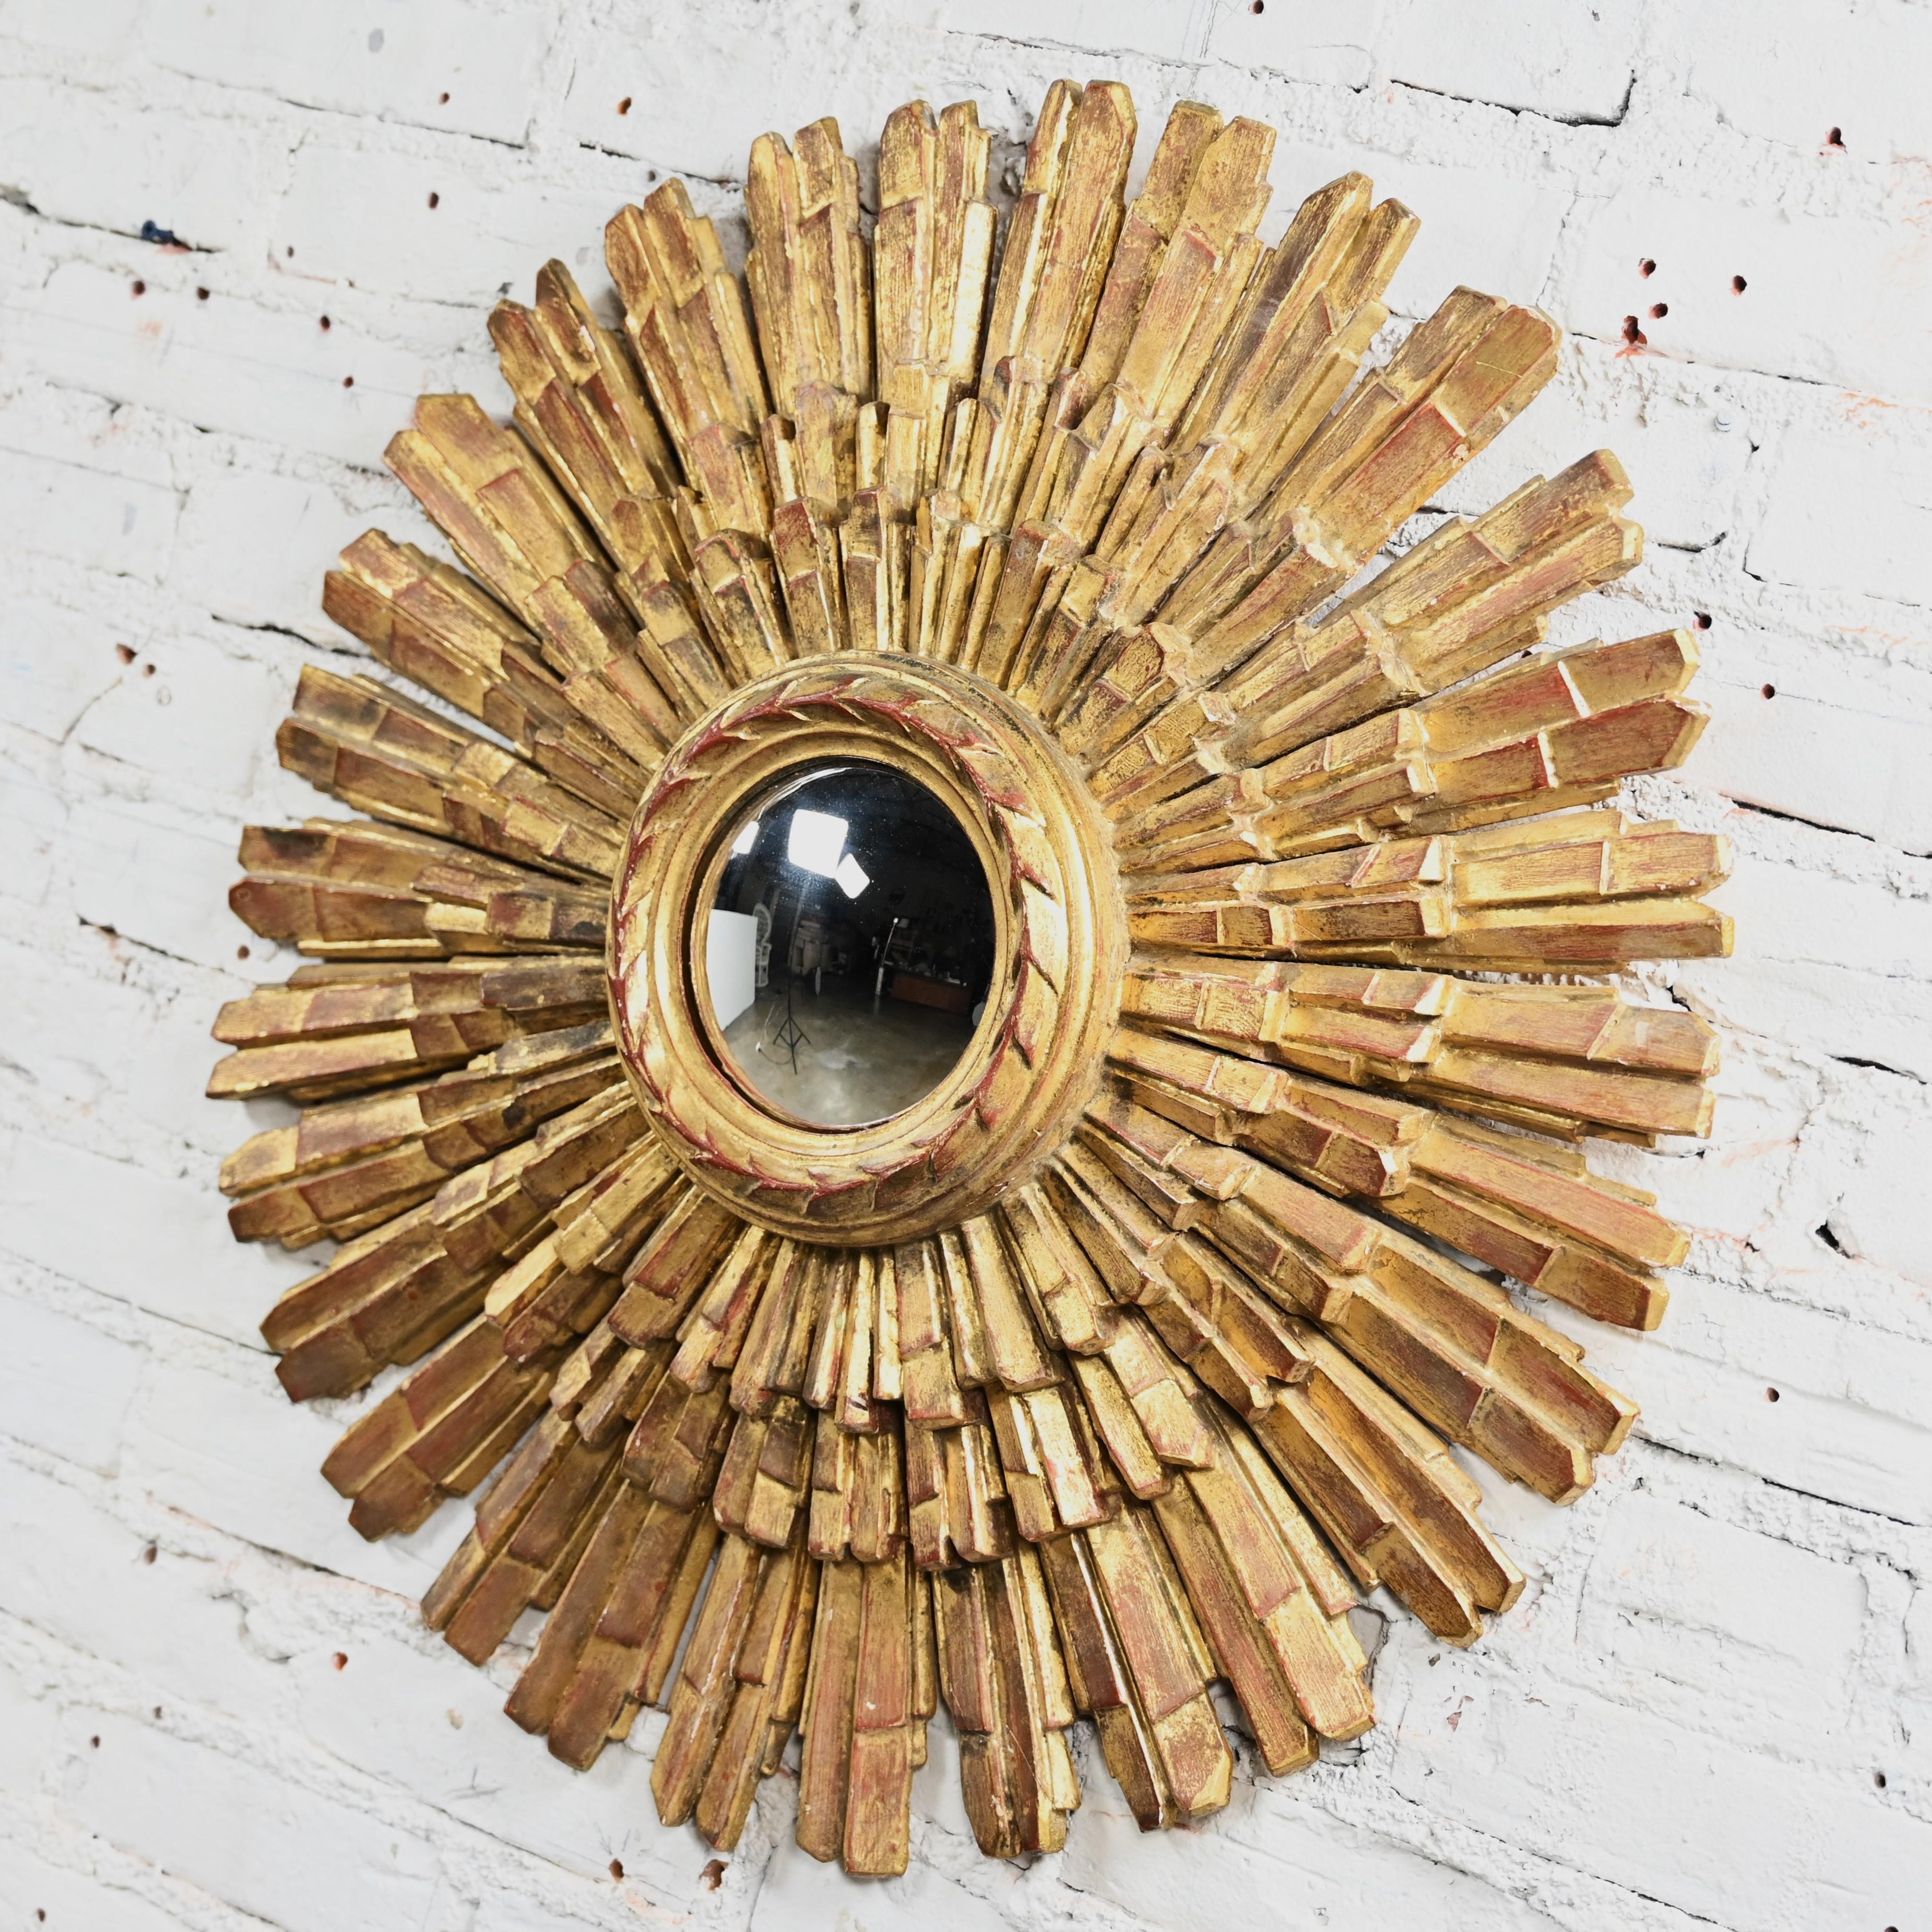 Marvelous Mid-20th Century Italian Renaissance gilded sunburst with convex center mirror wall hanging or décor by Palladio. Beautiful condition, keeping in mind that this is vintage and not new so will have signs of use and wear even if it has been